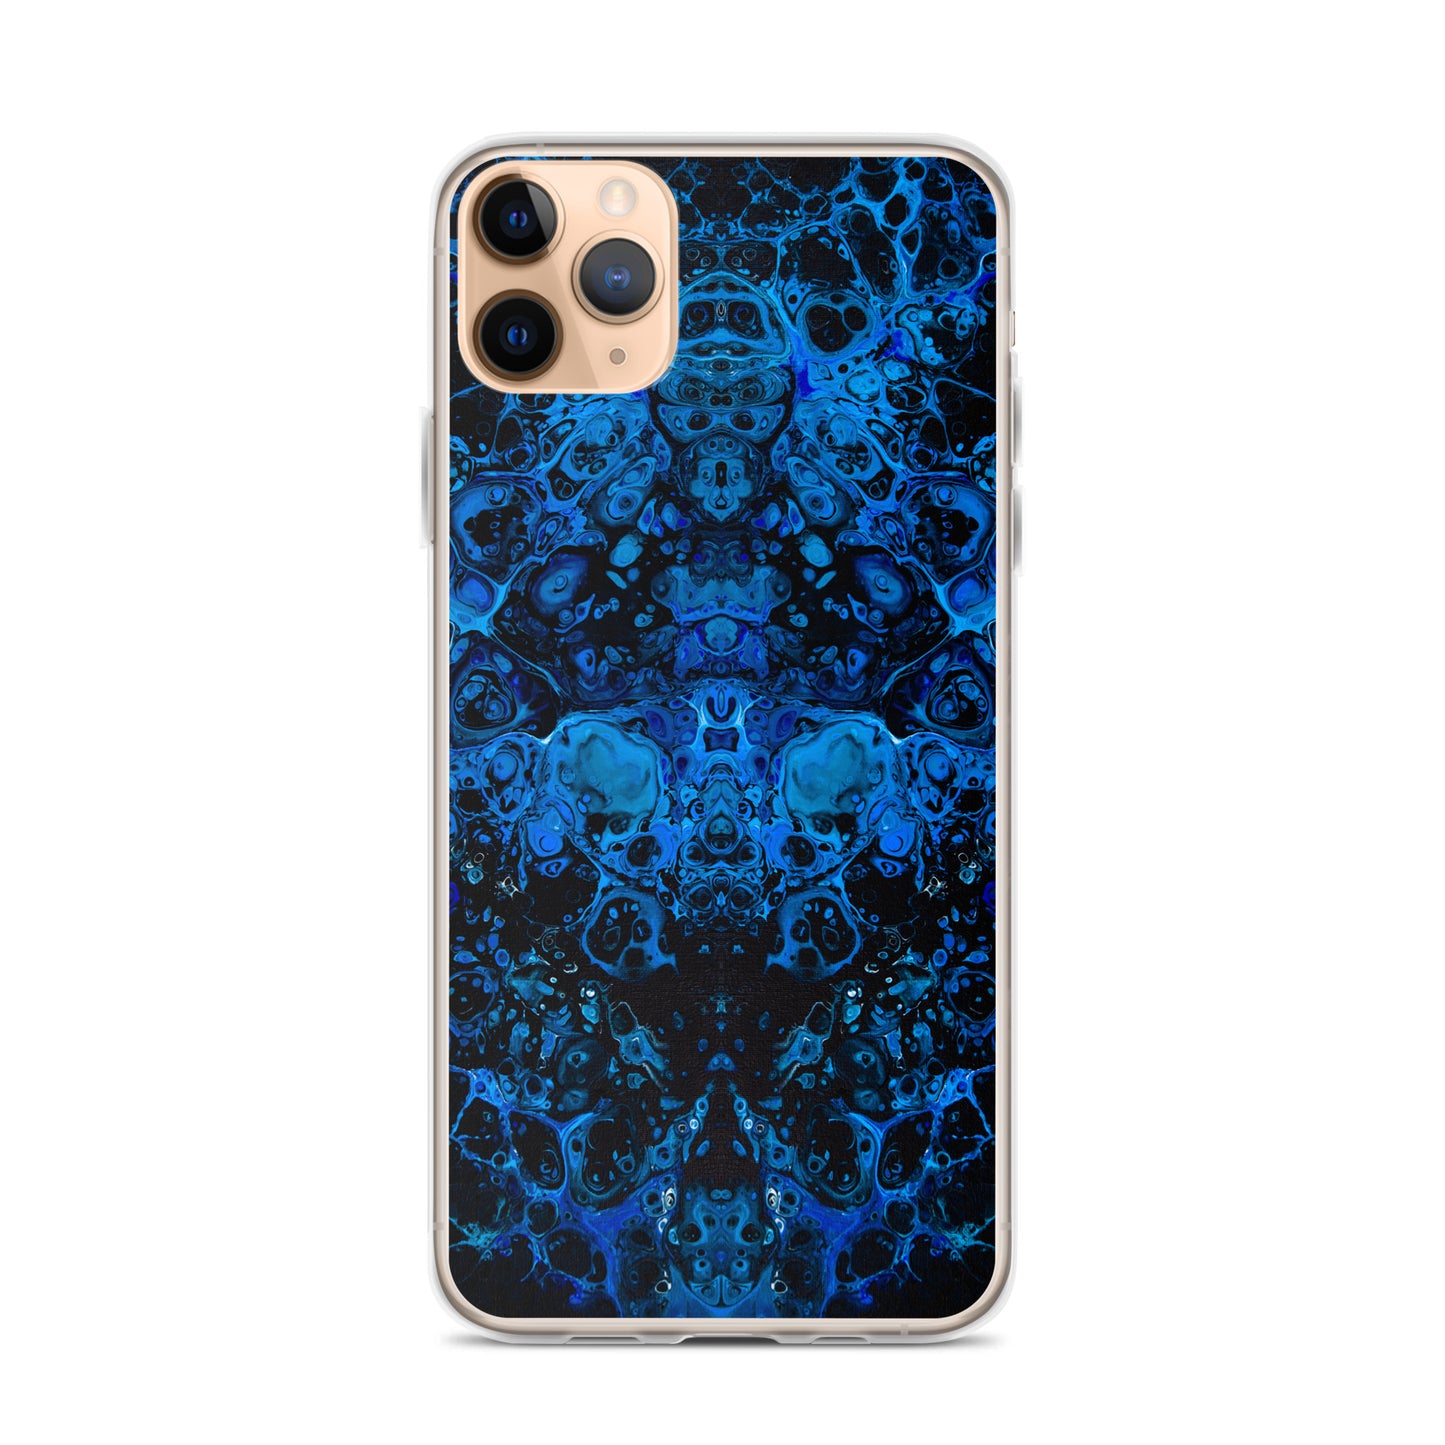 NightOwl Studio Custom Phone Case Compatible with iPhone, Ultra Slim Cover with Heavy Duty Scratch Resistant Shockproof Protection, Azul